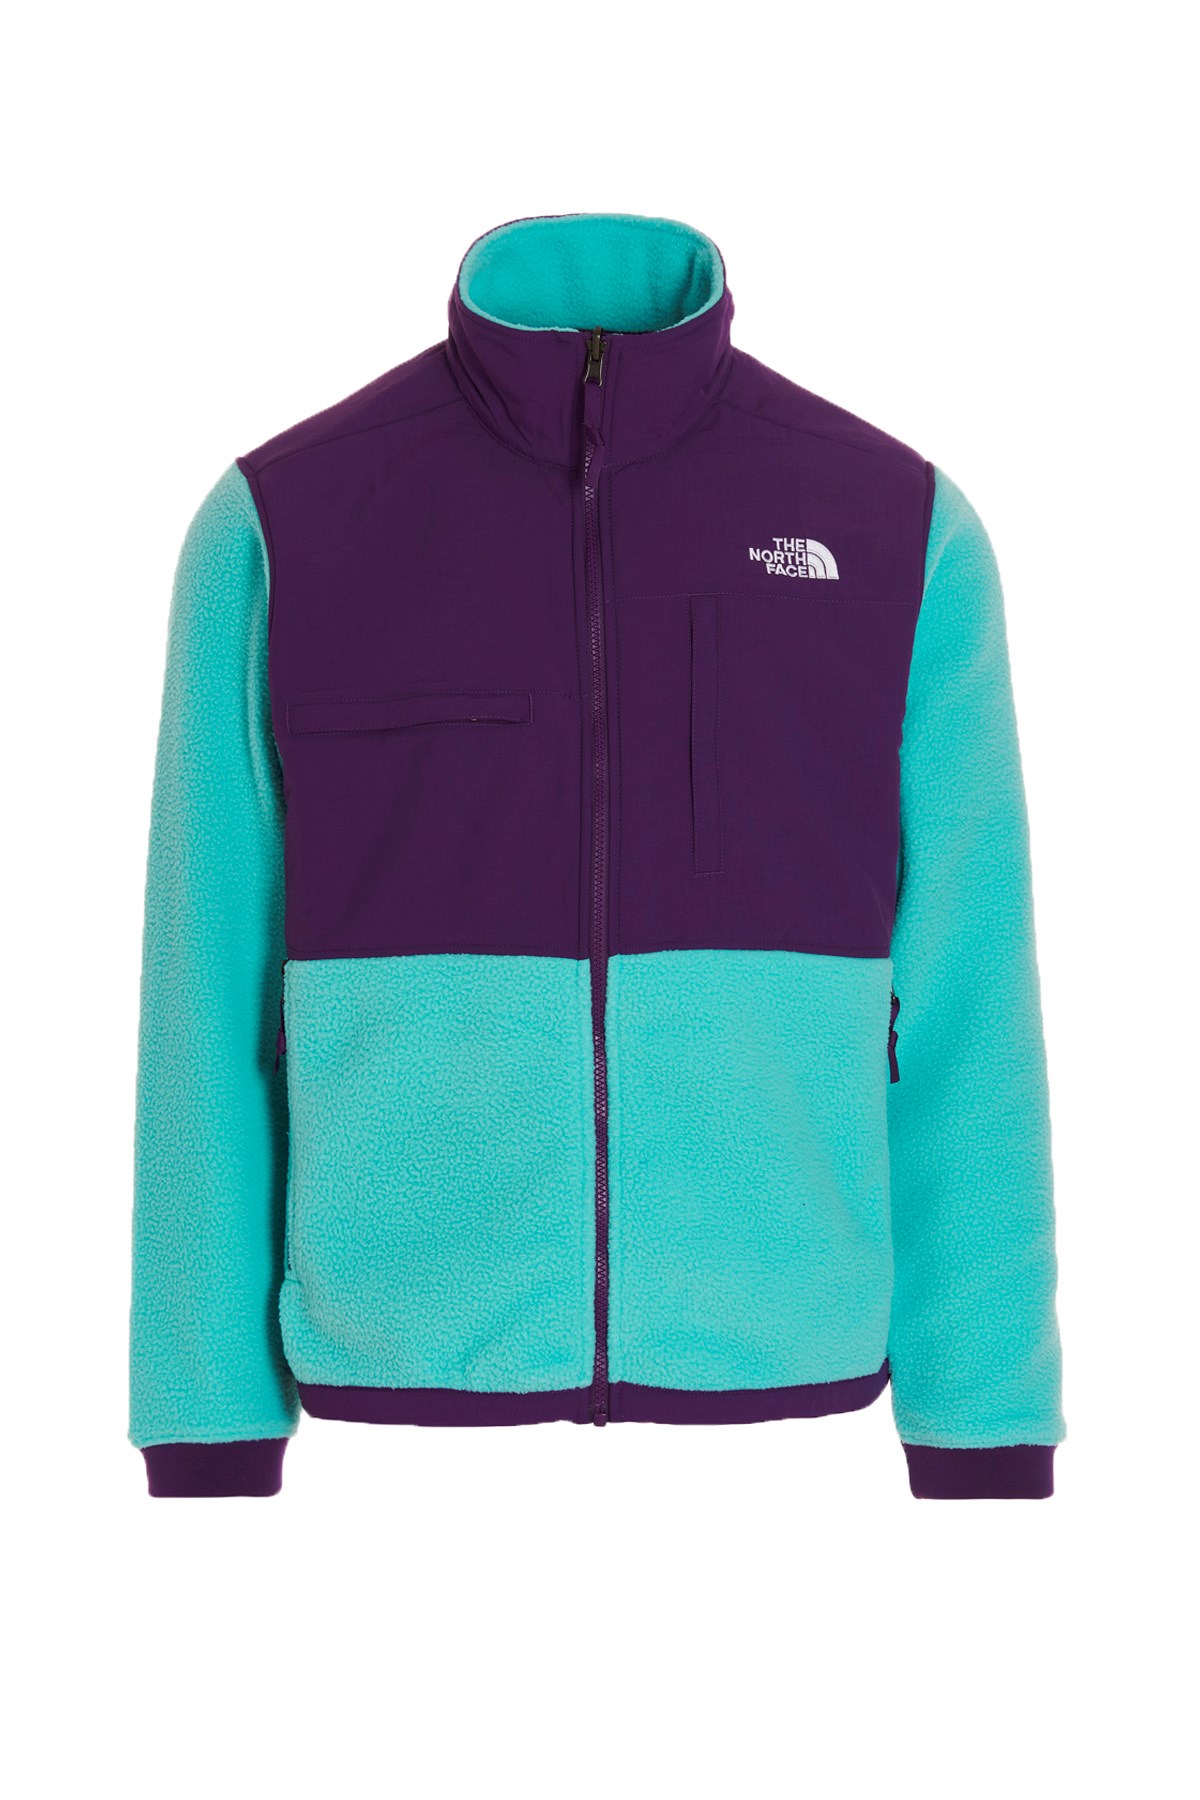 THE NORTH FACE The North Face Transantarctic Capsule Jacket